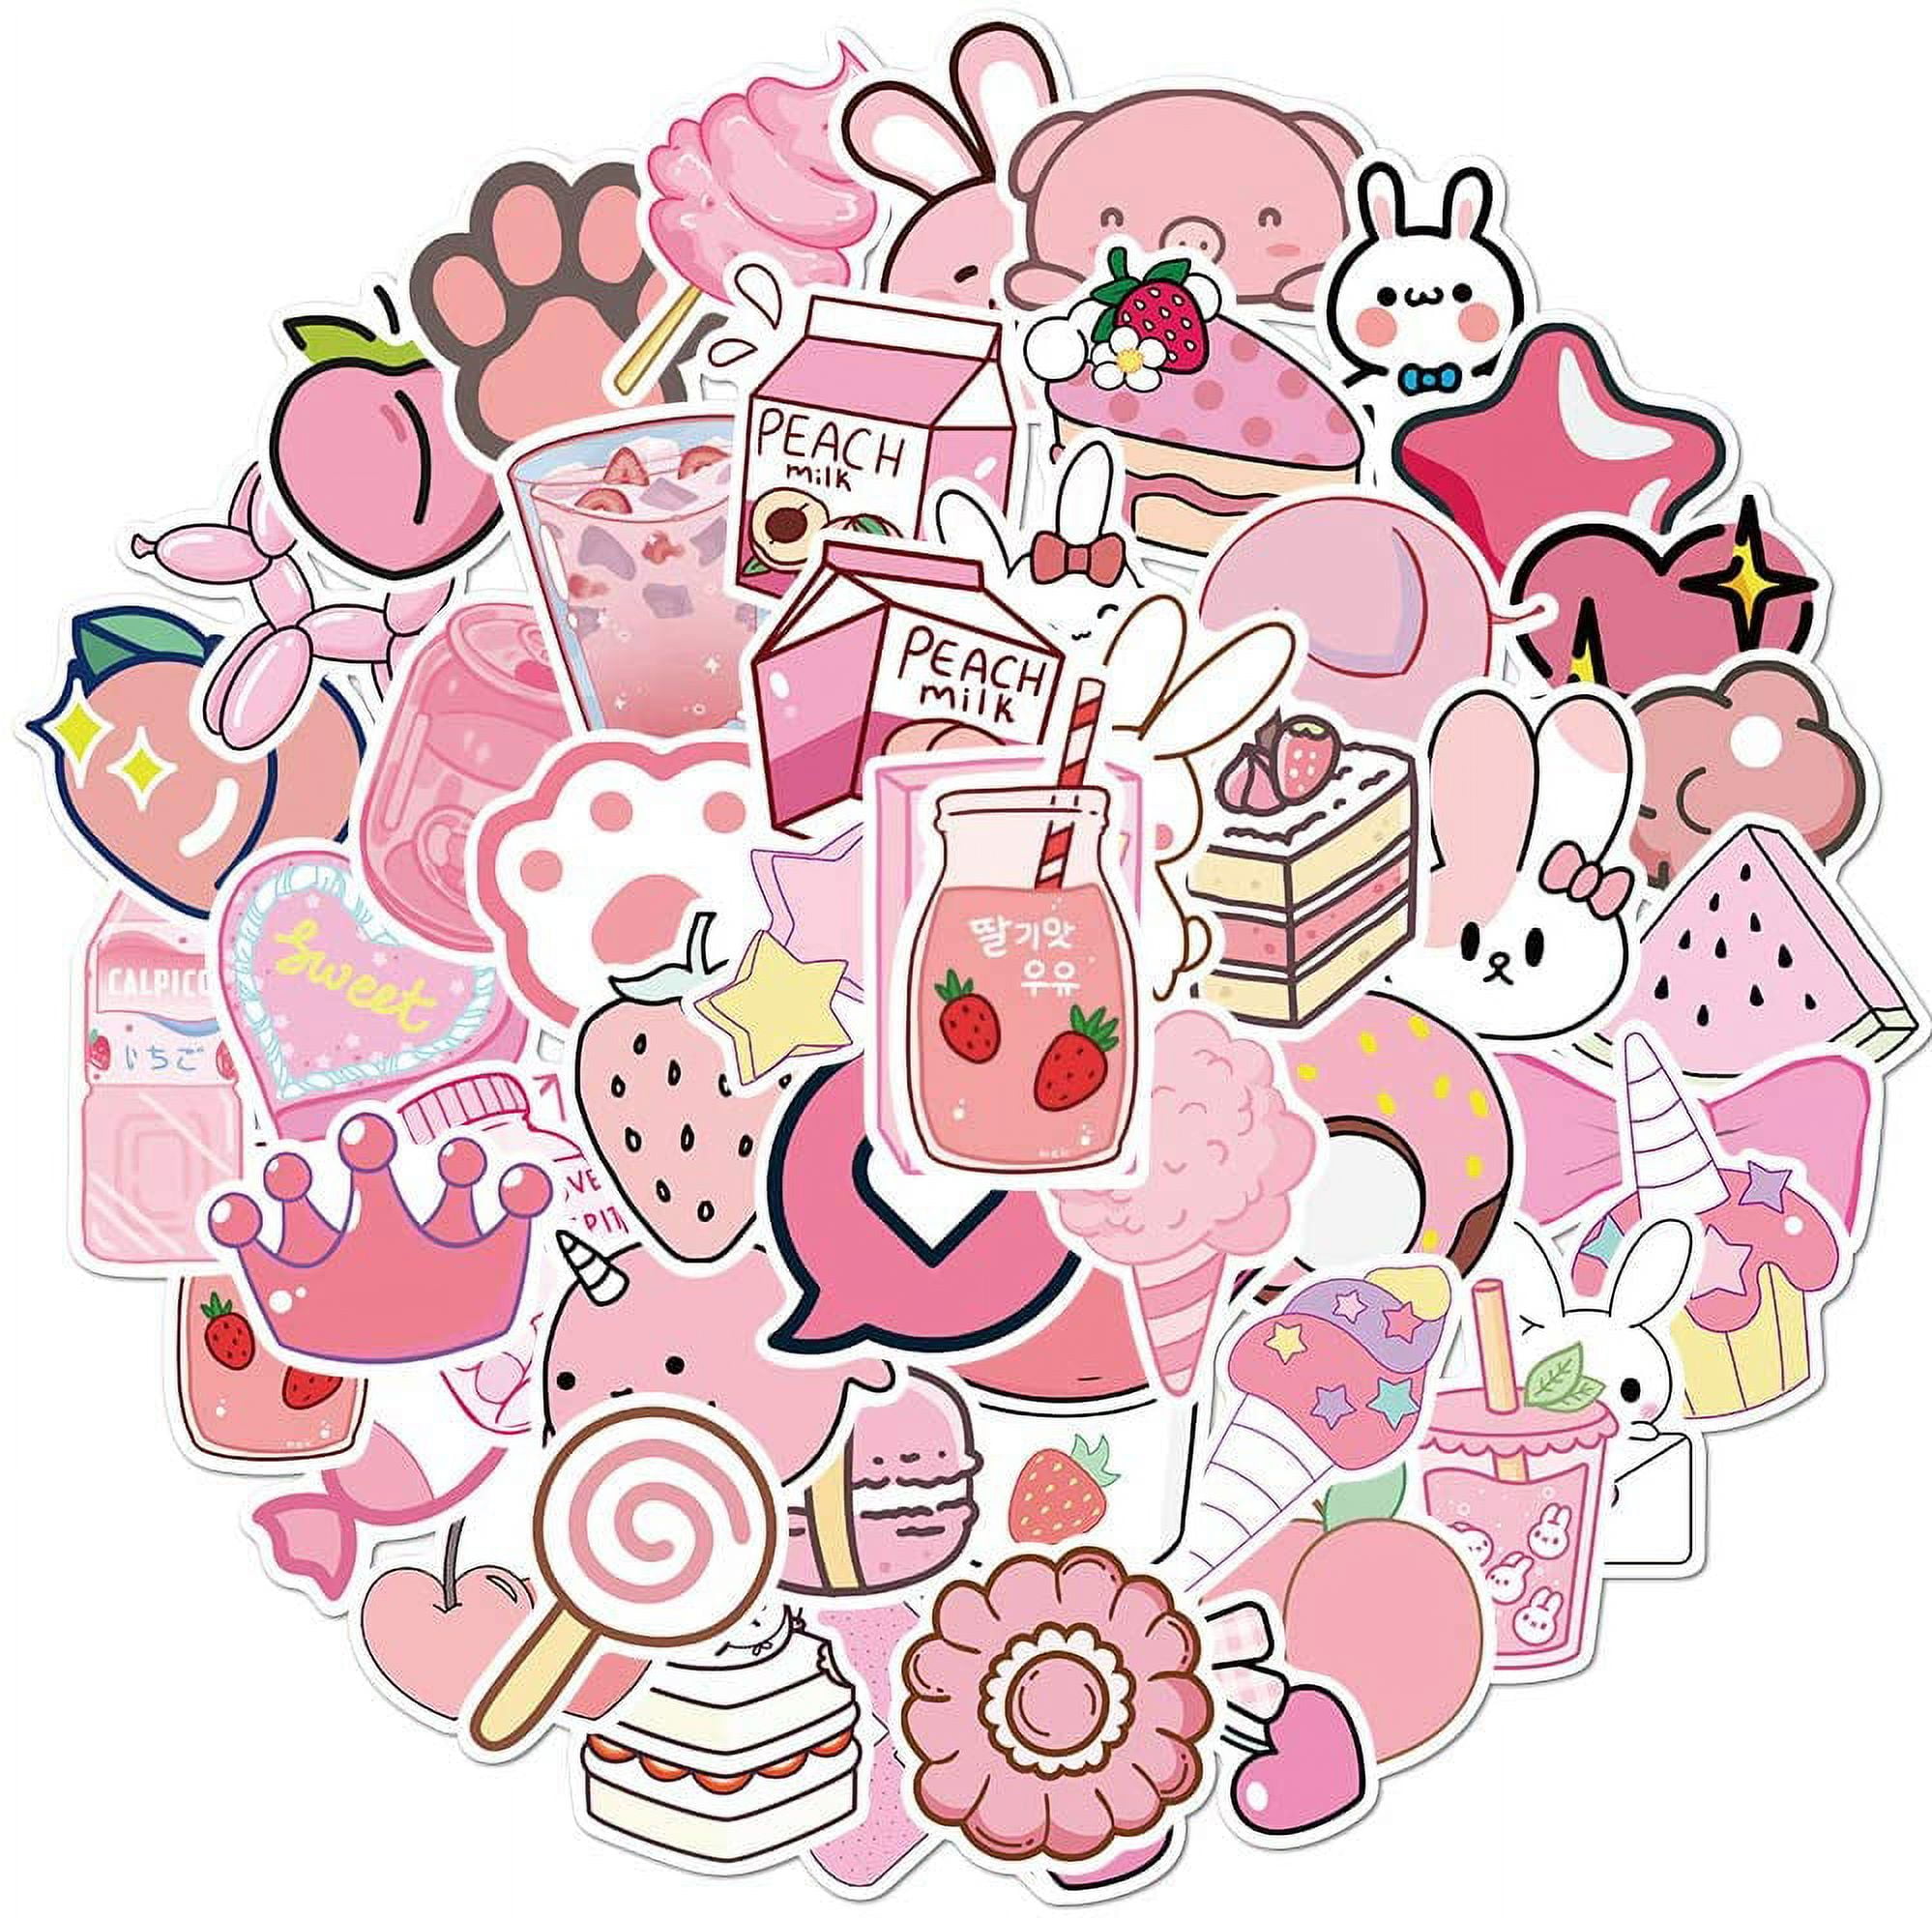 Kawaii Cute Stickers for Kids 50PCS Water Bottle Stickers Aesthetic Pink  Vsco Girl Stickers for Laptop, Phone, Hydro Flask Car Waterproof Stickers  for